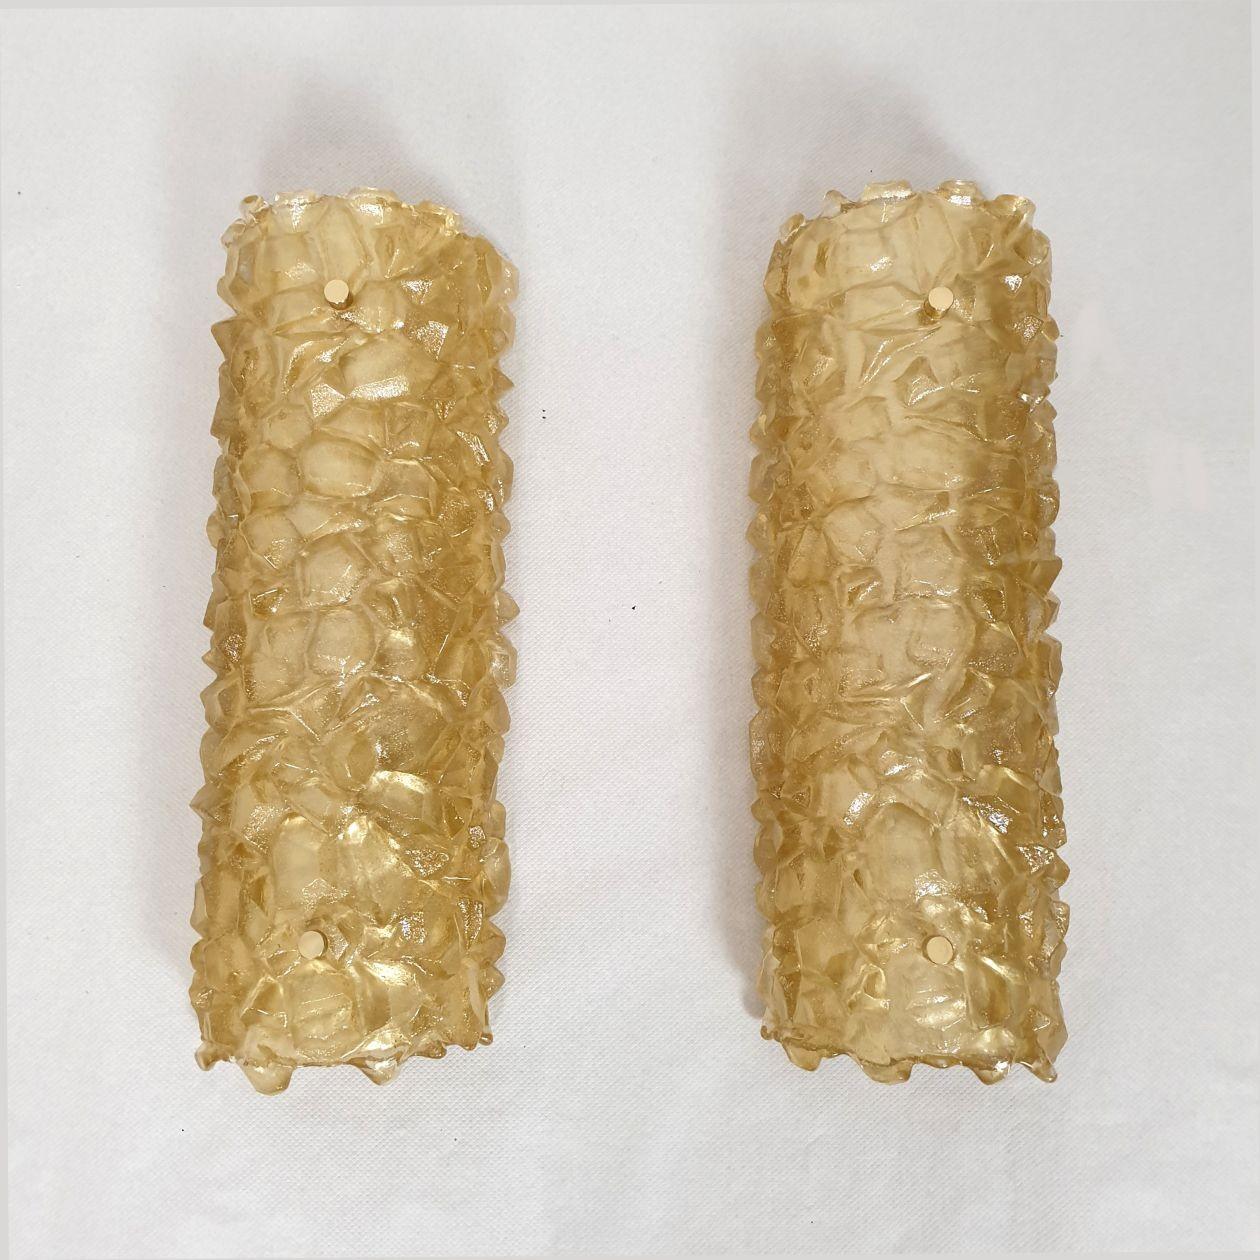 Pair of Mid Century Modern Murano glass sconces, Mazzega style, Italy 1980s.
The pair of sconces is made of a thick piece of golden yellow Murano glass, with an irregular surface.
The glass is translucent.
The back plate is painted white and the